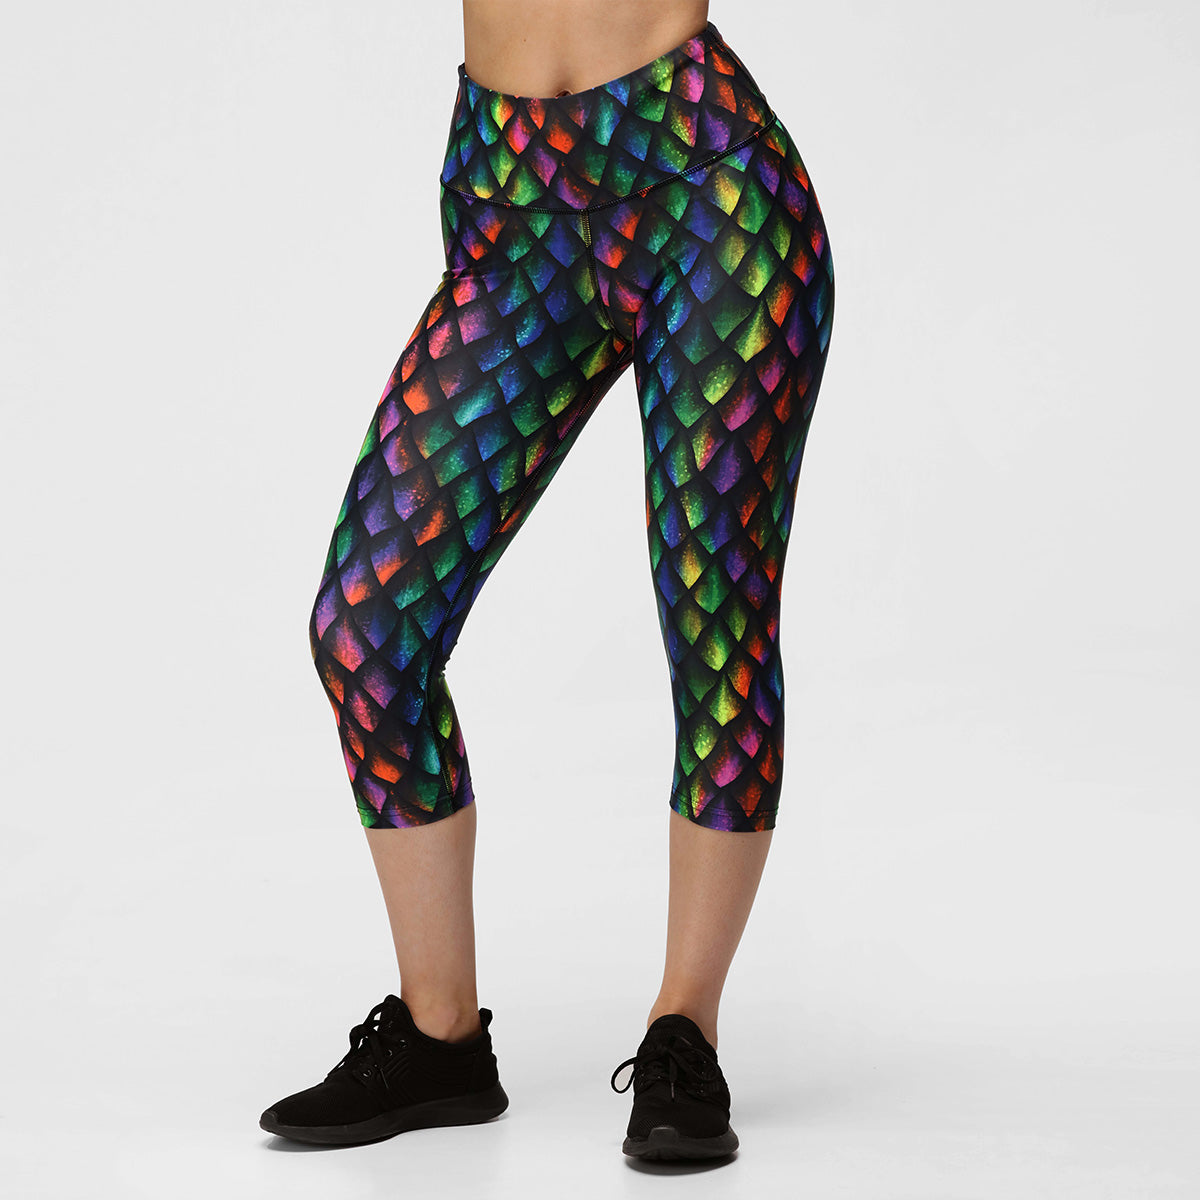 Black Dragon Scales Leggings, Active Workout Wear for Yoga or Gym